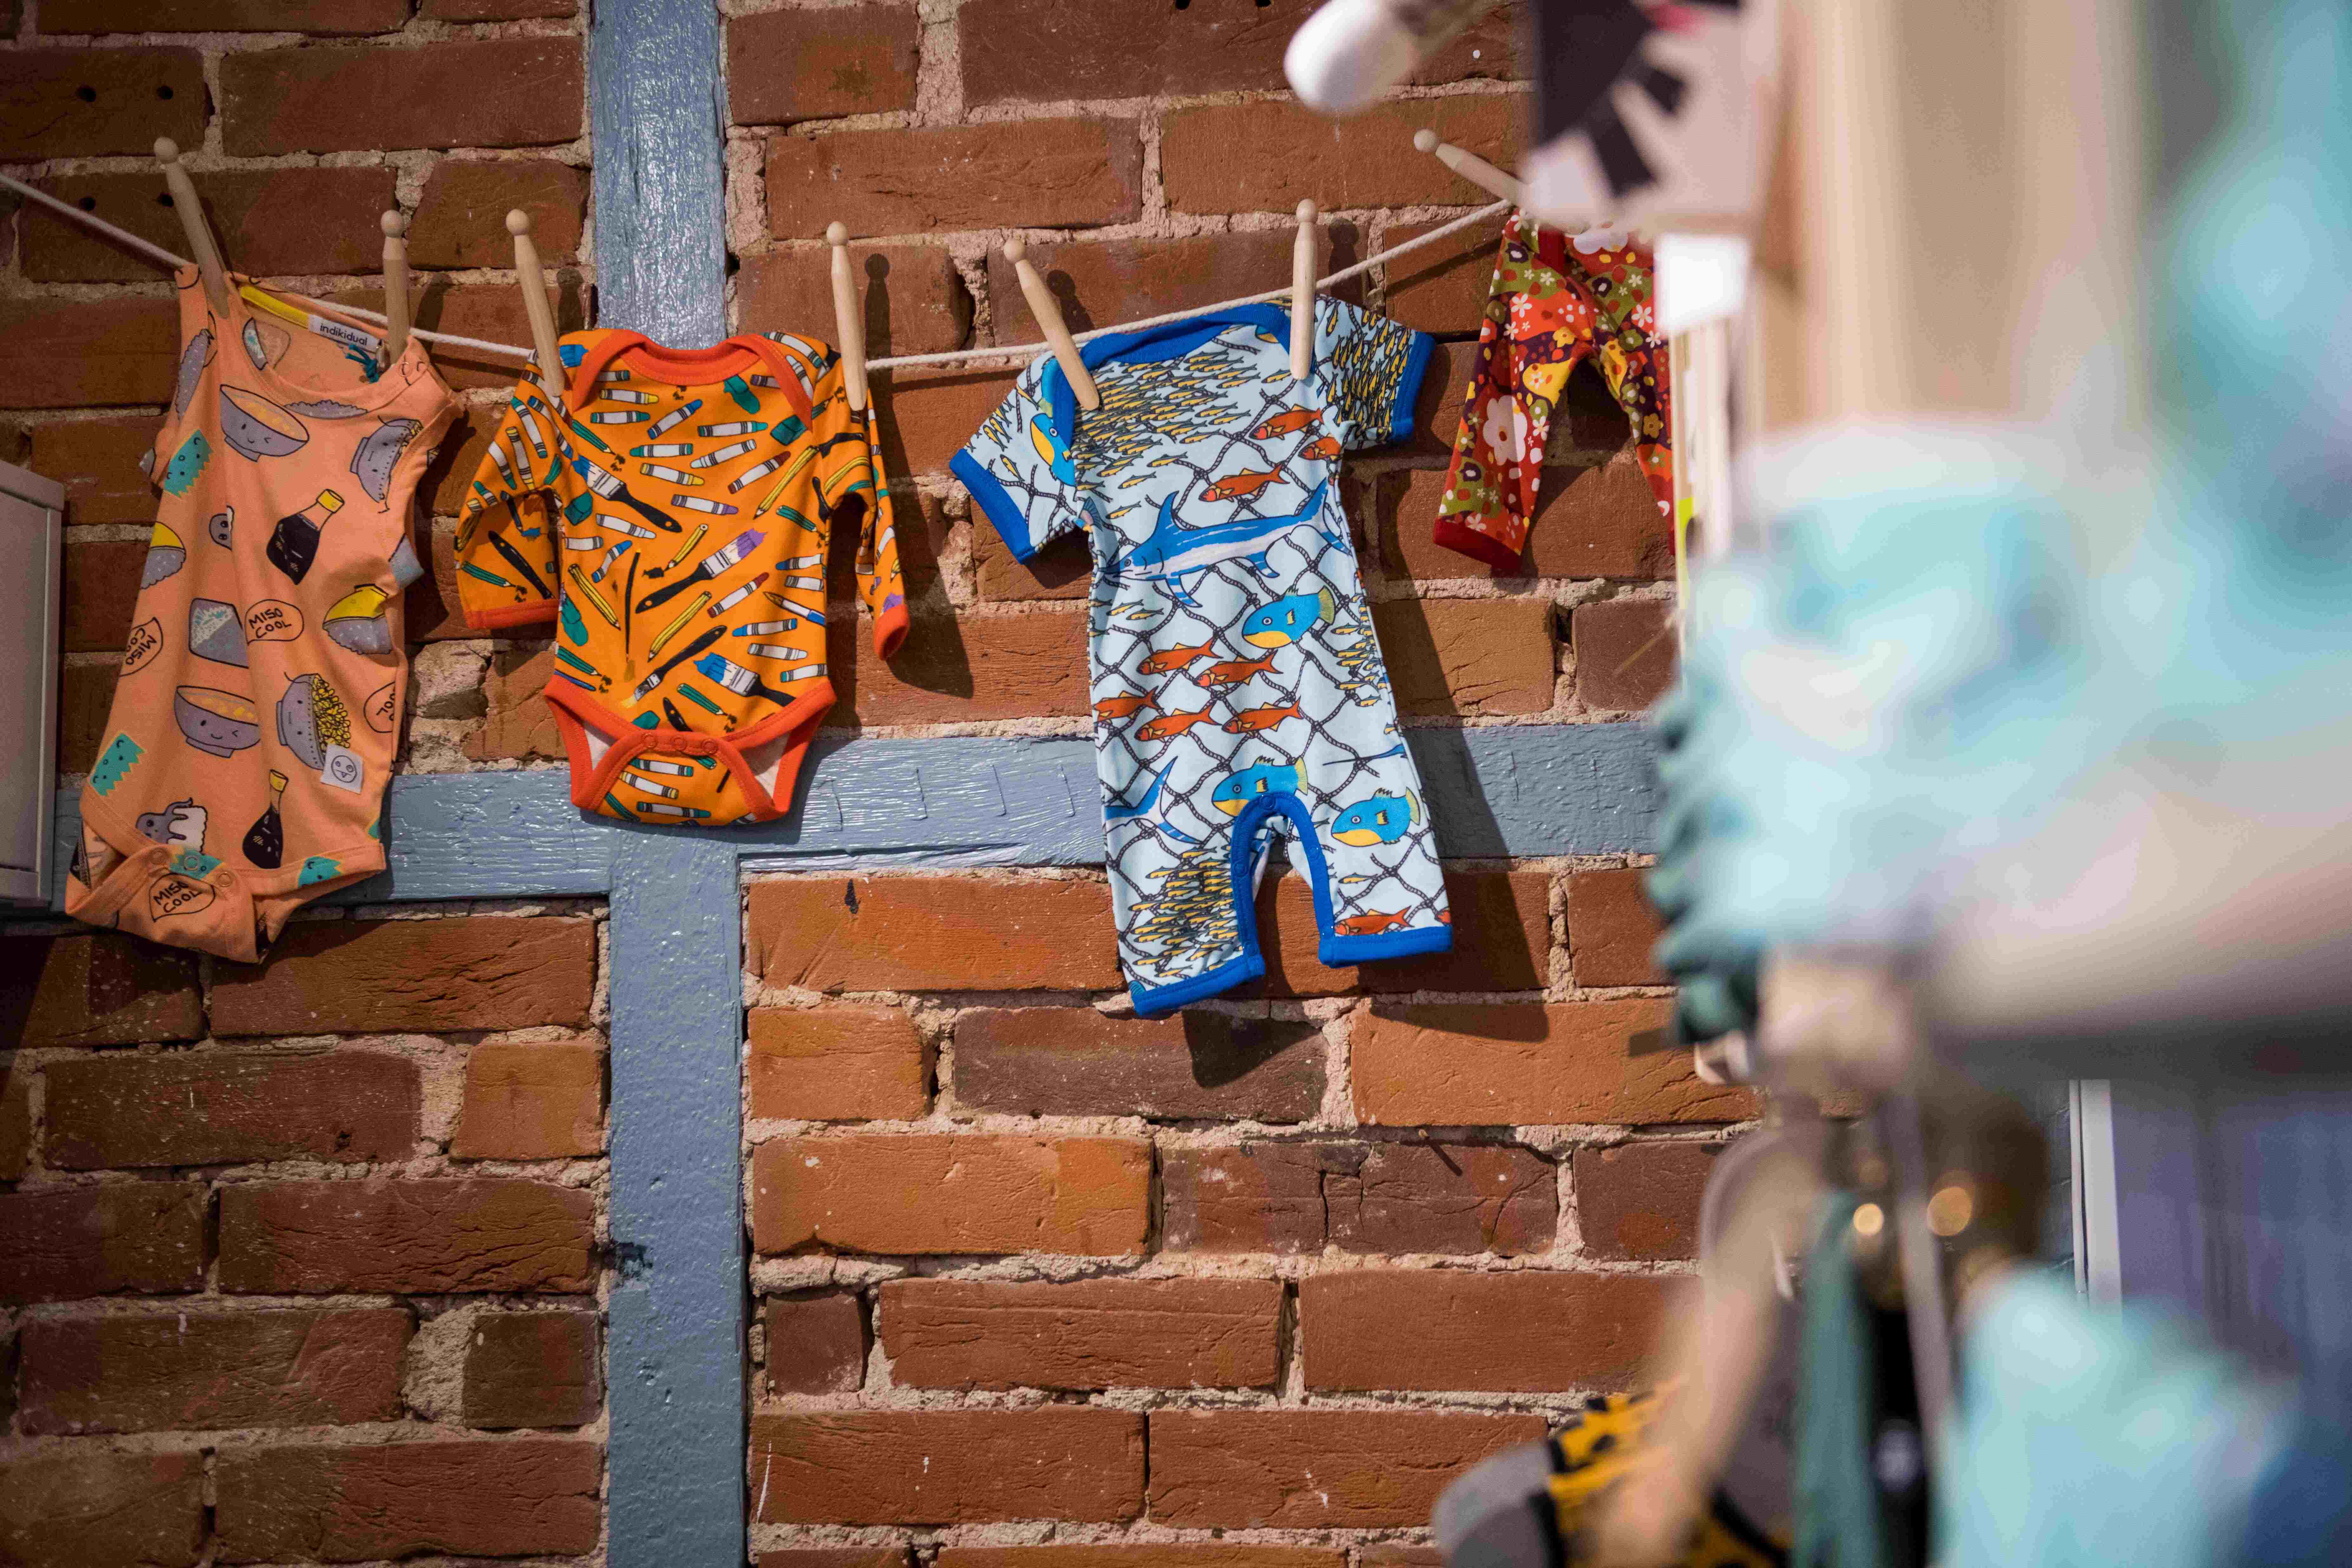 Colourful baby clothing displayed hanging on a washing line across the old brick wall of Moo Like a Monkey shop premises.